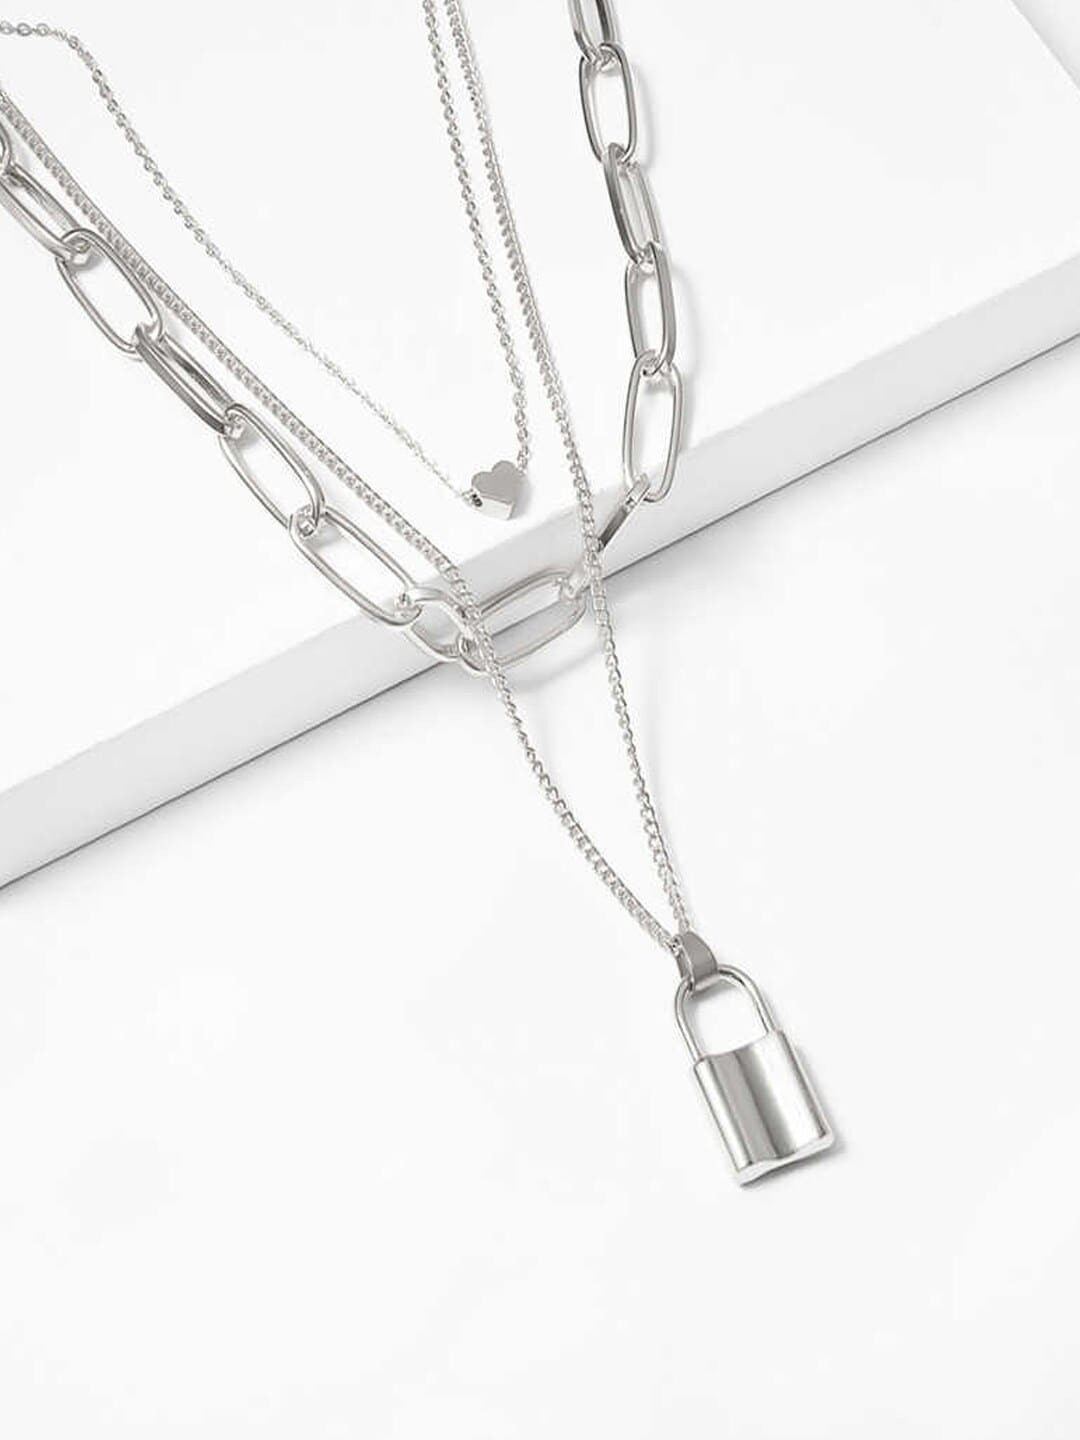 YouBella Silver-Toned Silver-Plated Layered Necklace Price in India